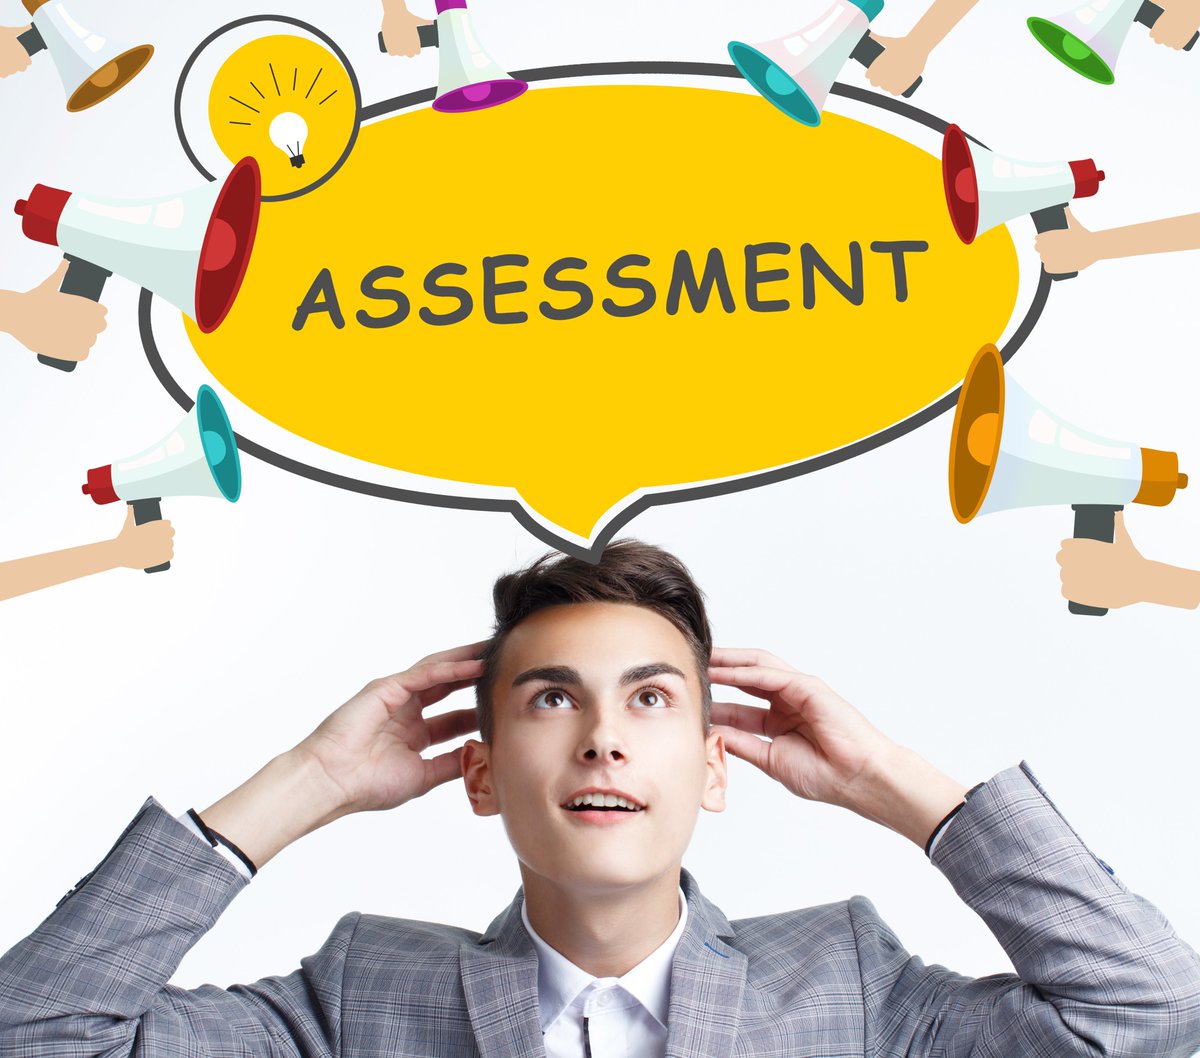 Career Assessment Australia tinyurl.com/5cxnv5k5 #jobsearch #jobseekers #executives #managers #careerchange #professionals #over30 #over40 #over50 #migrants #outplacement #redundant #graduates #hr #ceo #careermanagement #PhD